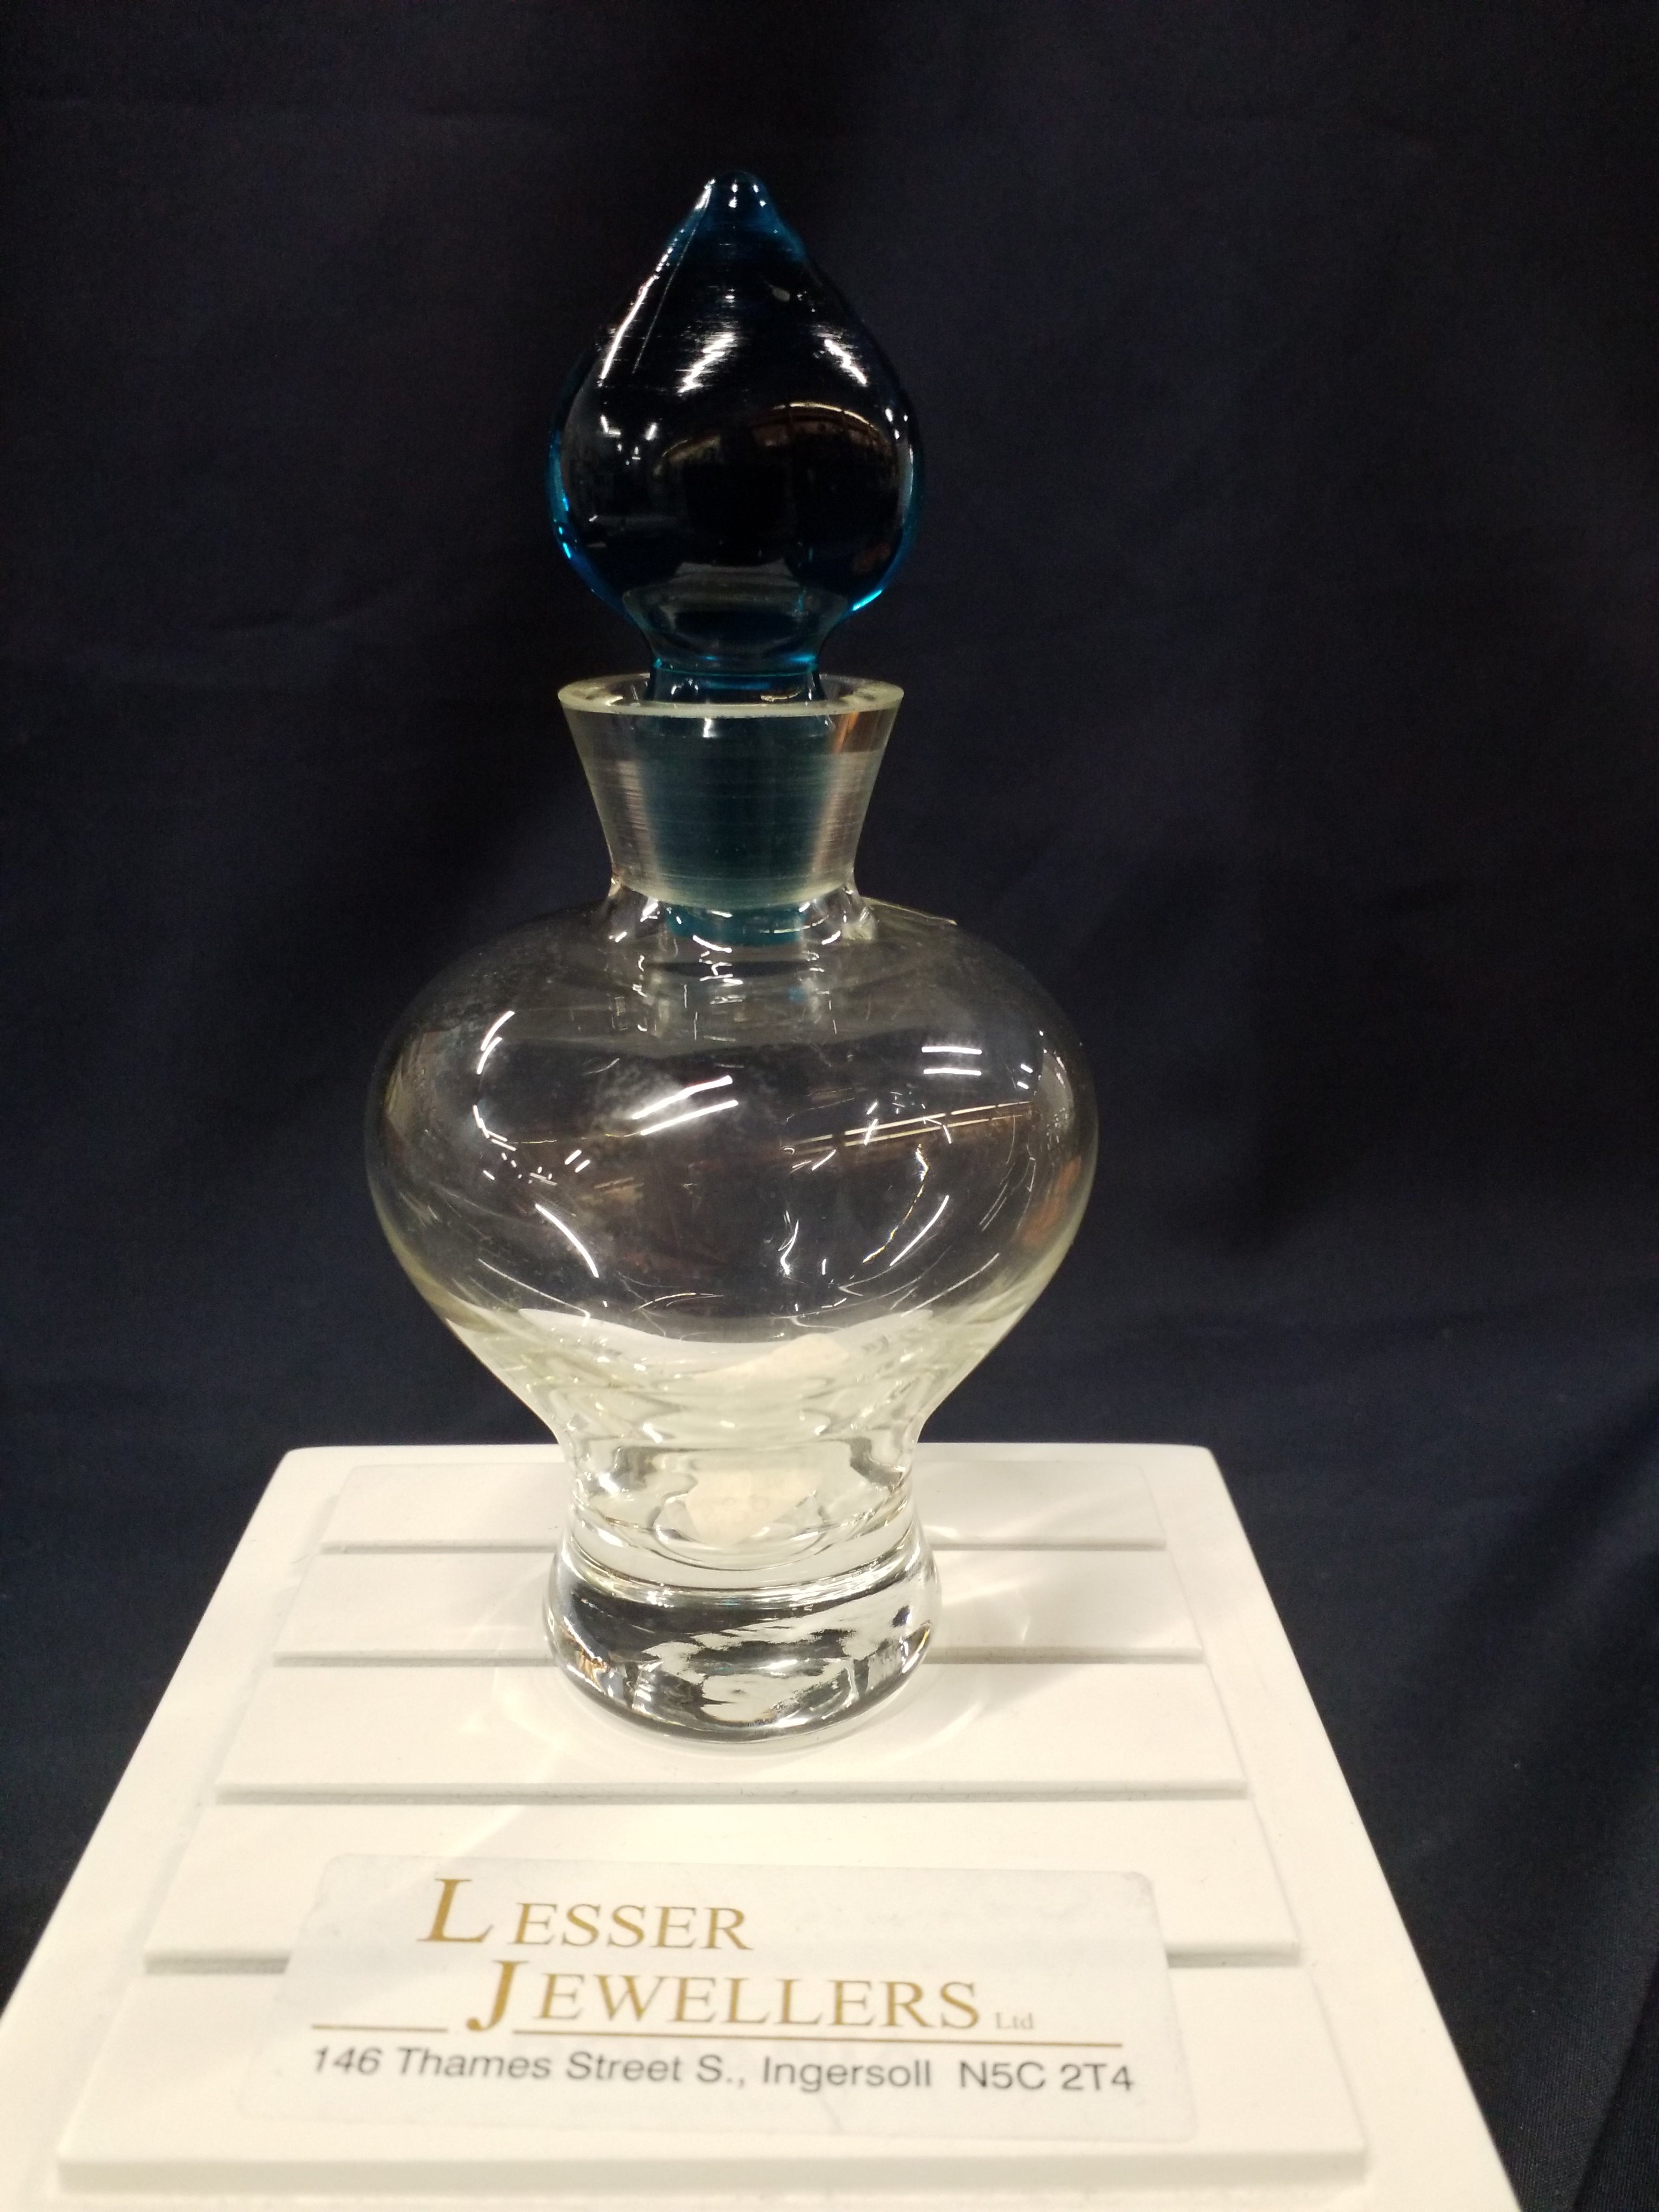 Perfume Bottle - CLEARANCE - 25% off will be applied in store, or at checkout!